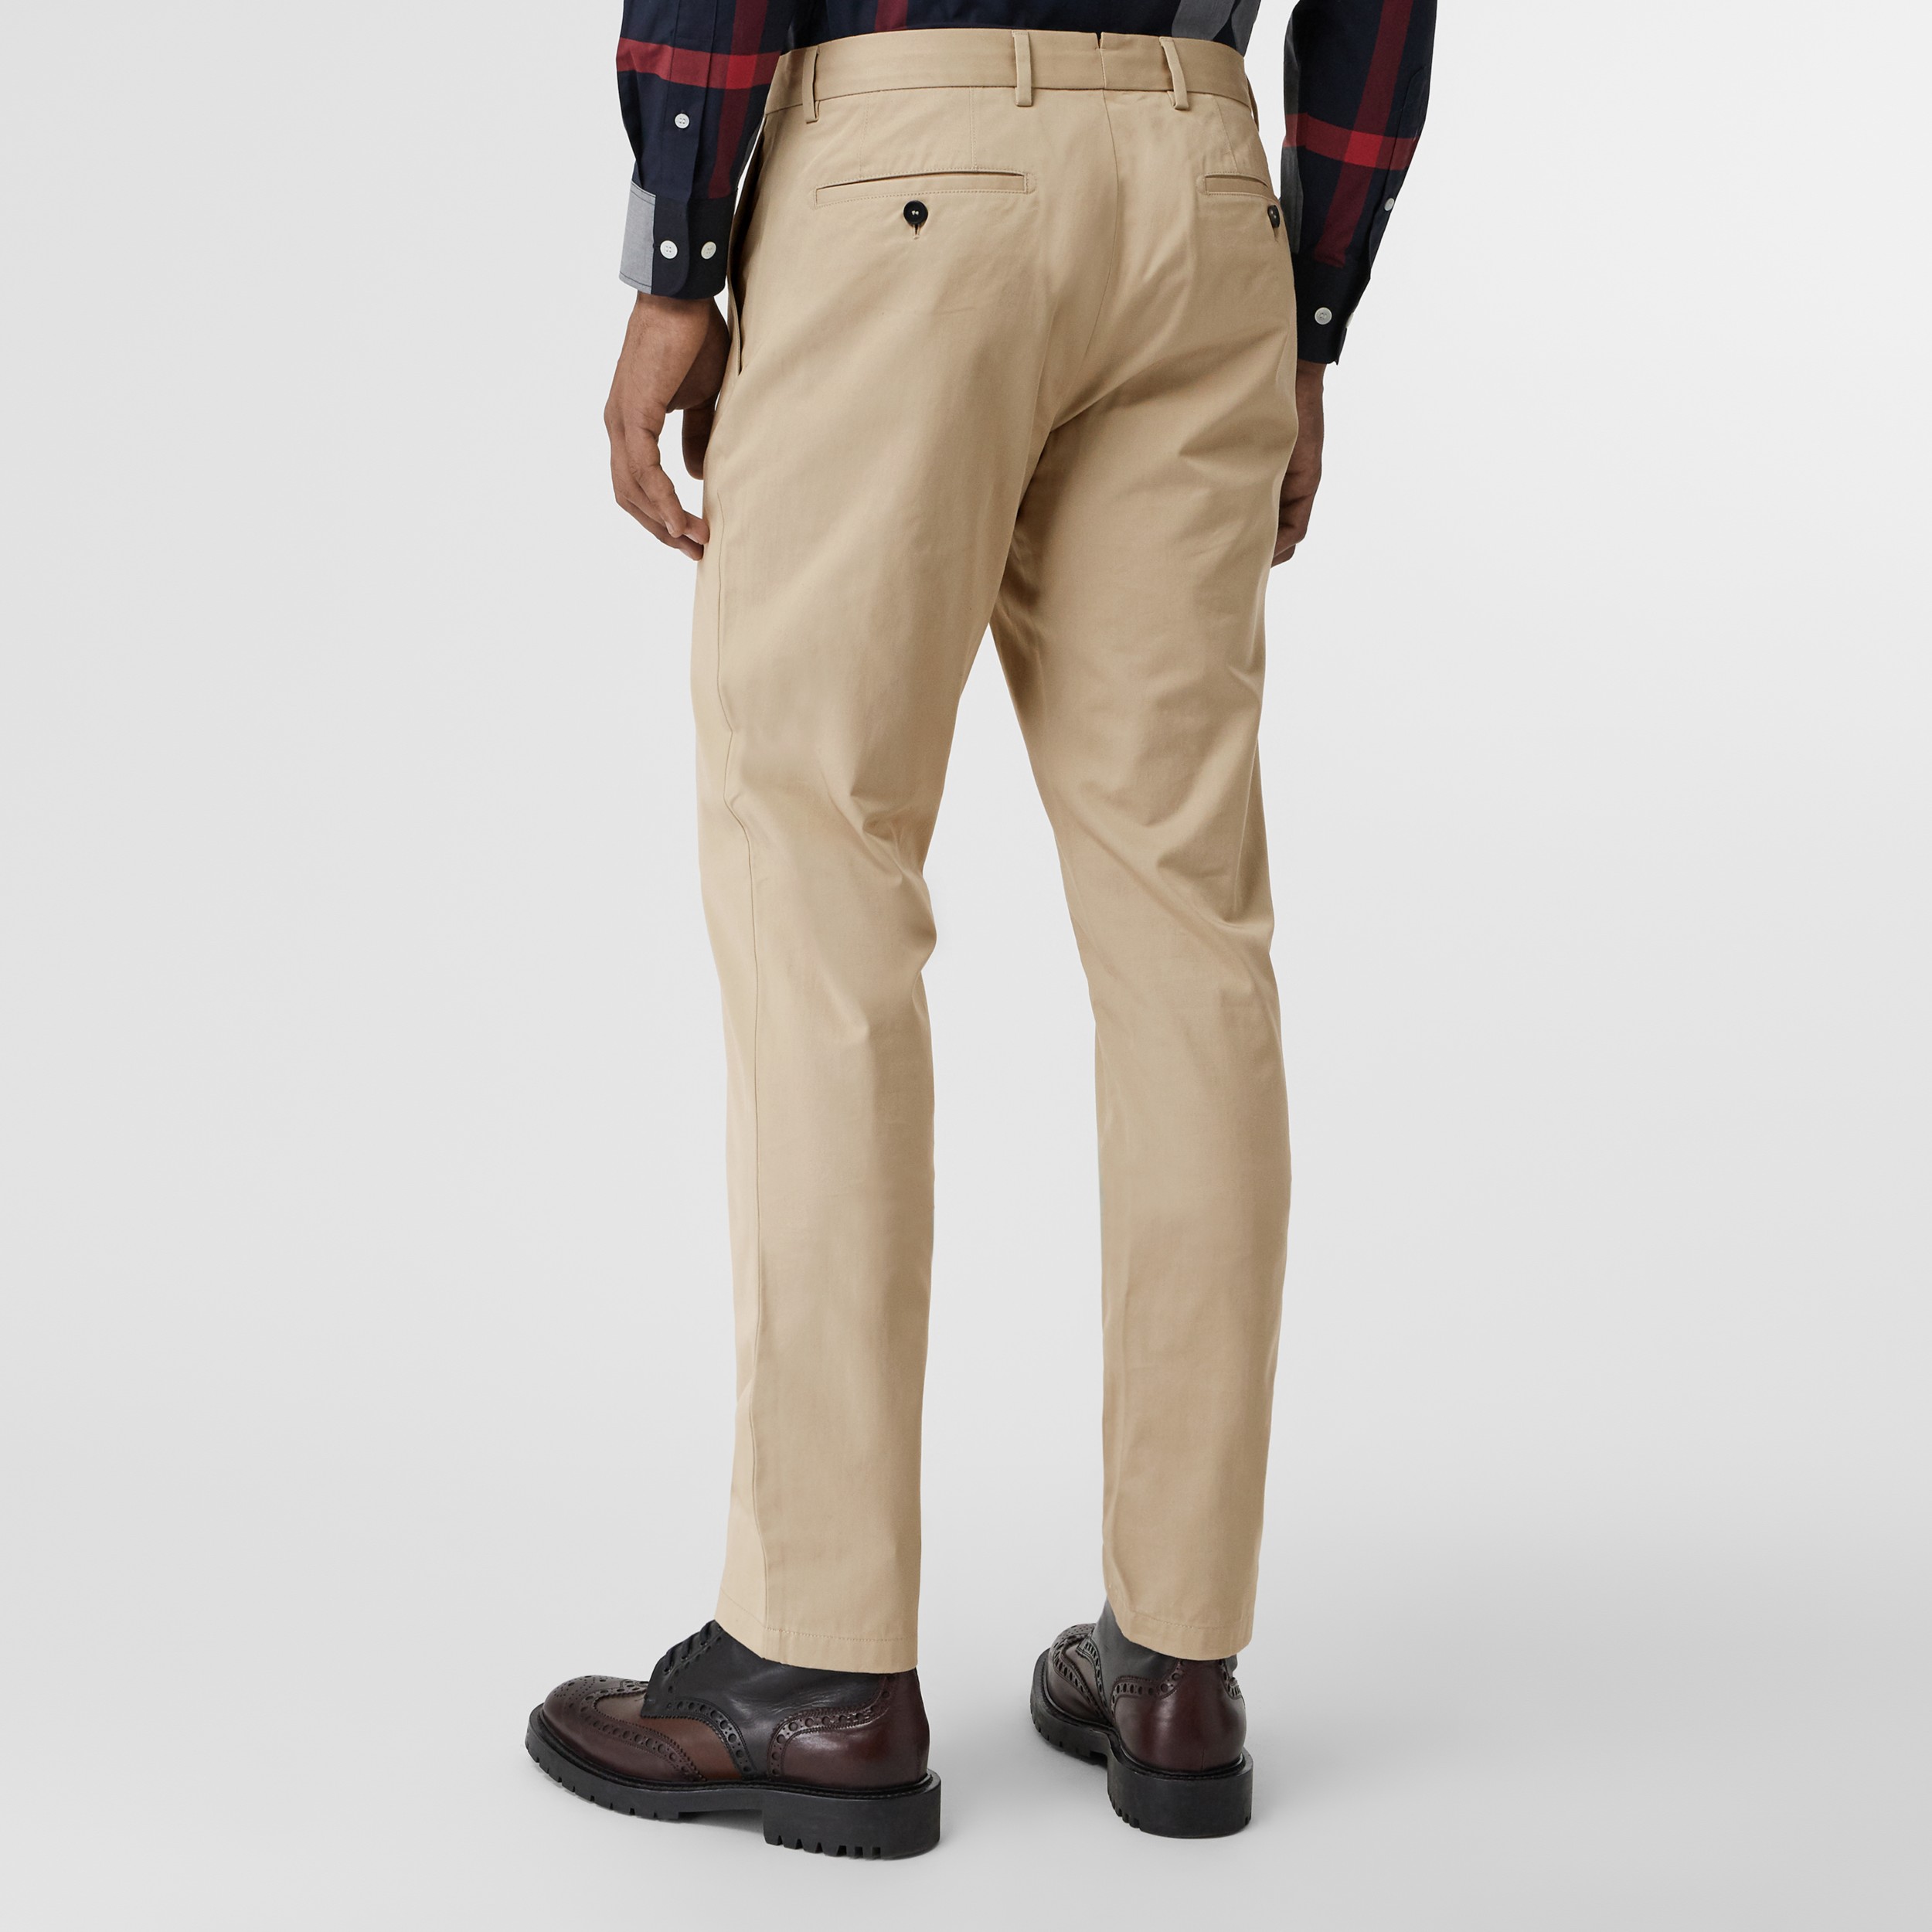 Slim Fit Cotton Chinos in Stone - Men | Burberry United States